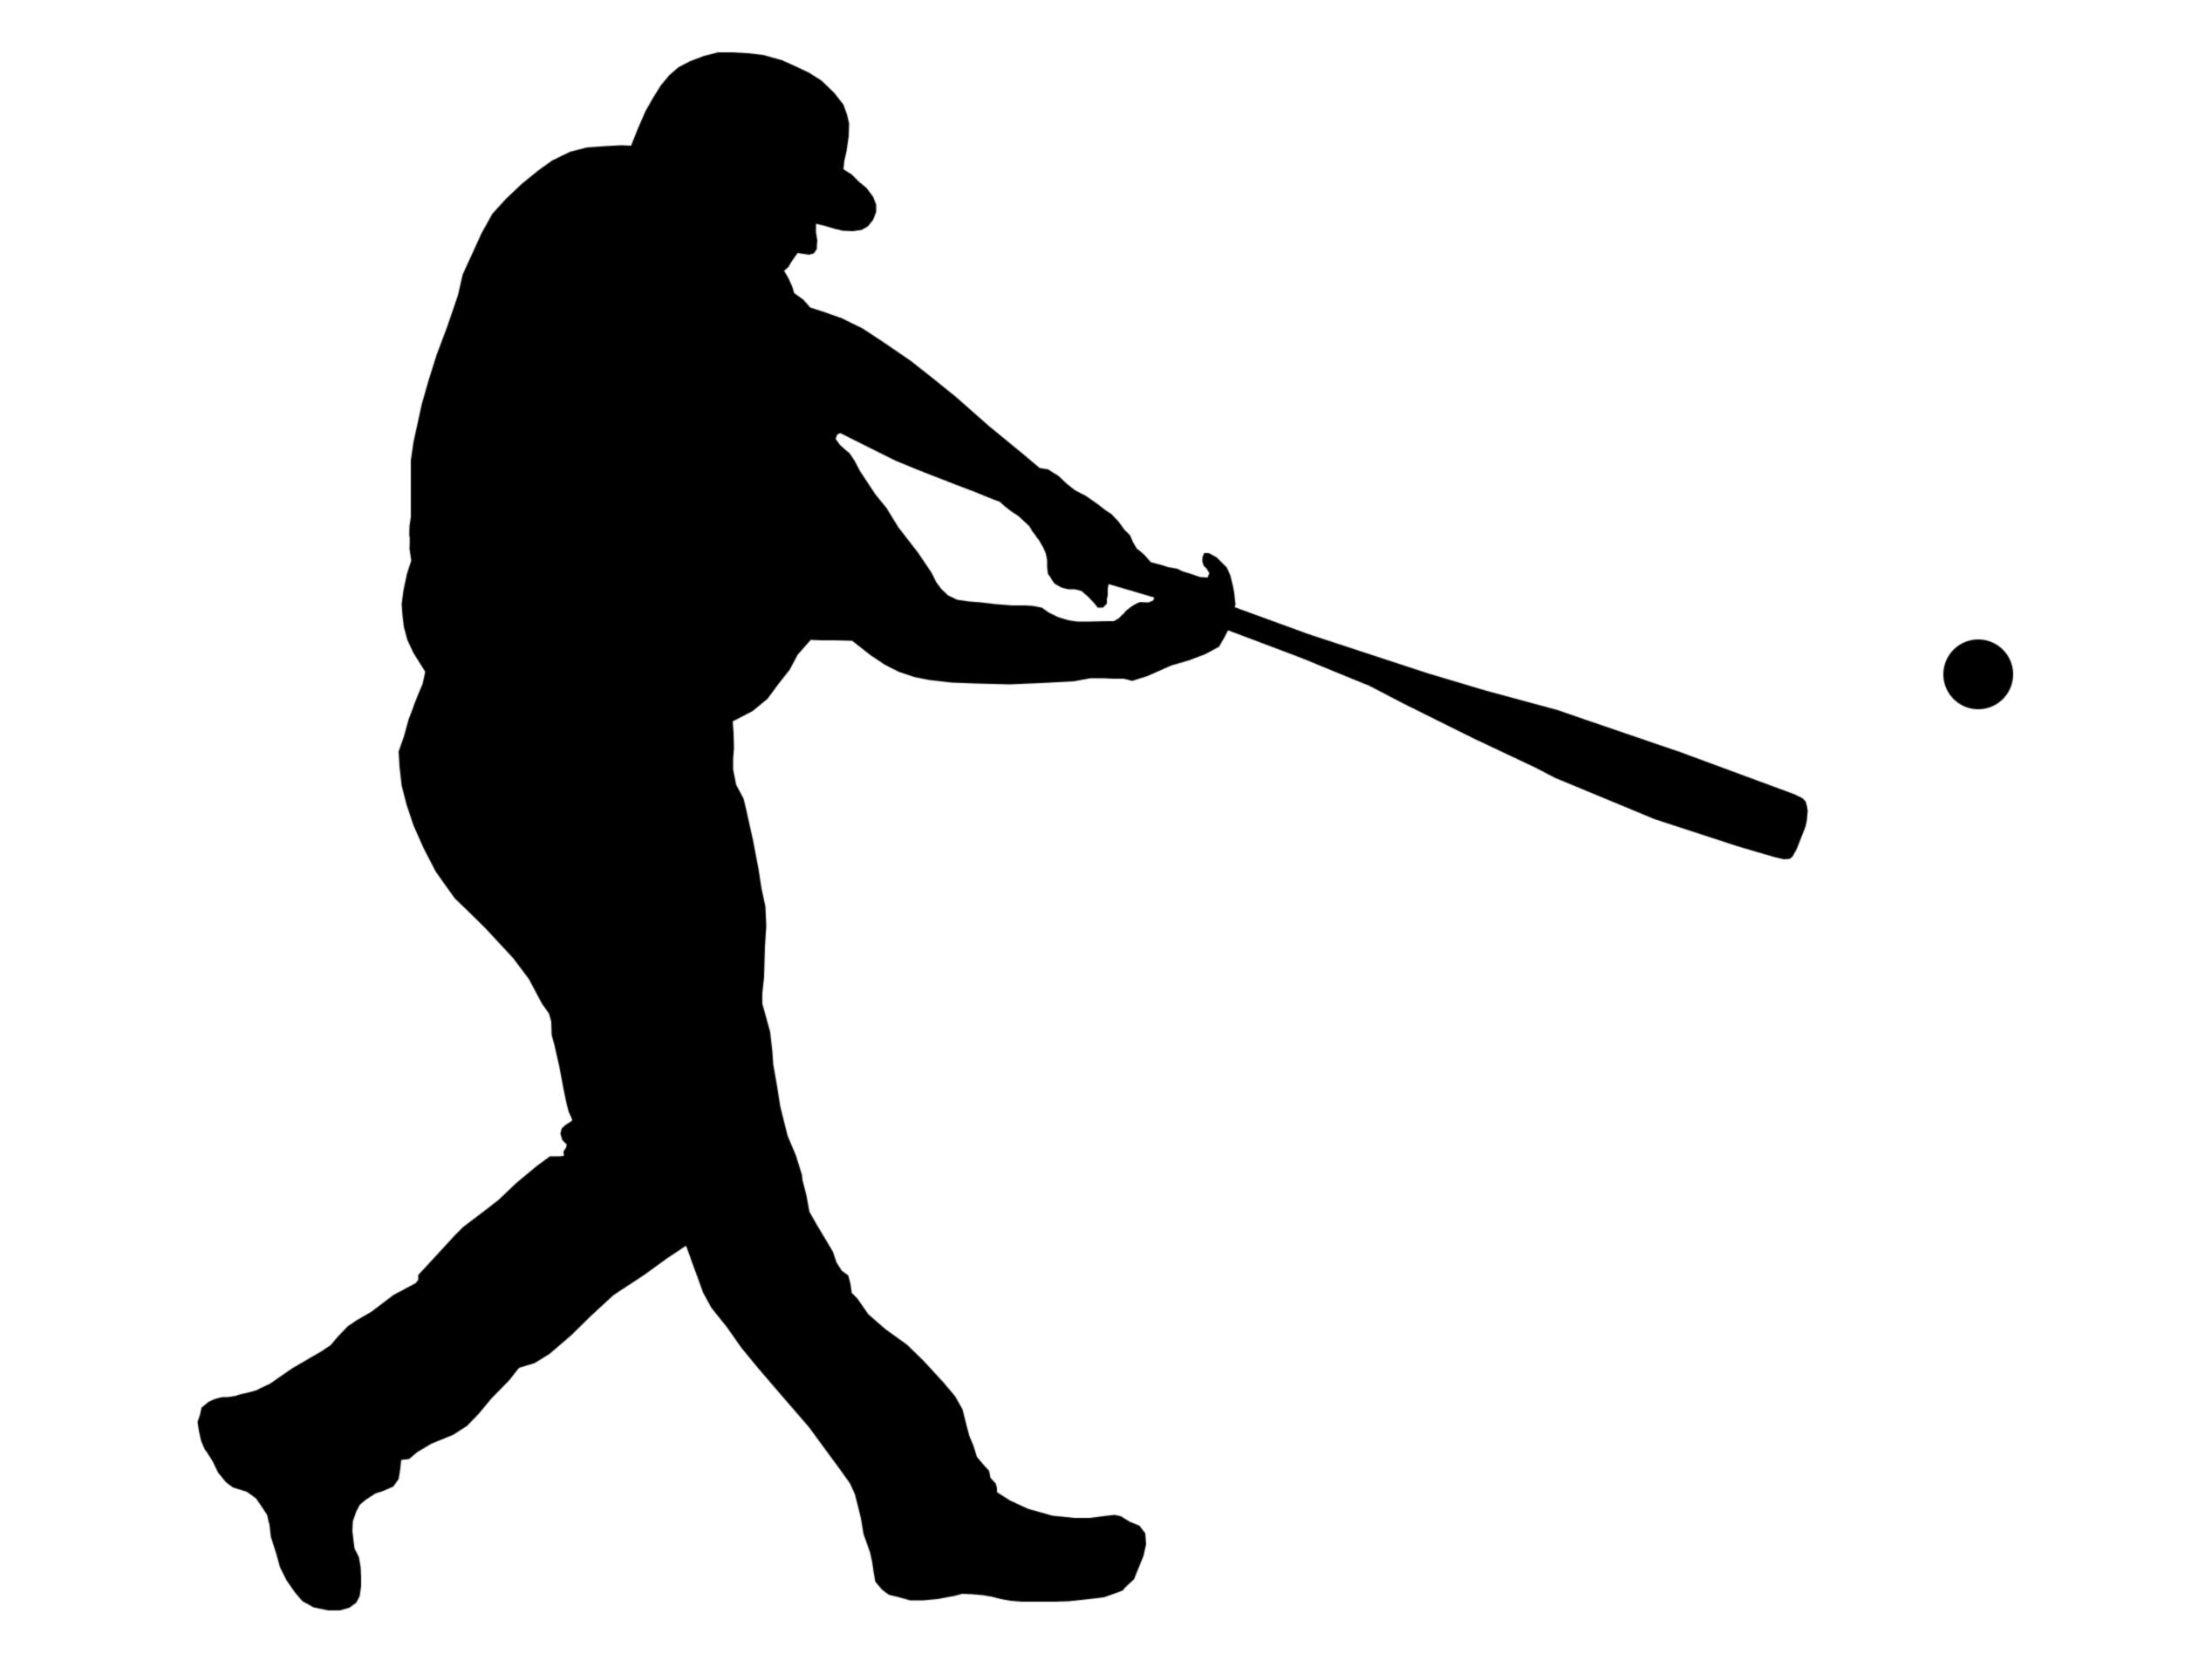 Baseball Silhouette Images at GetDrawings | Free download